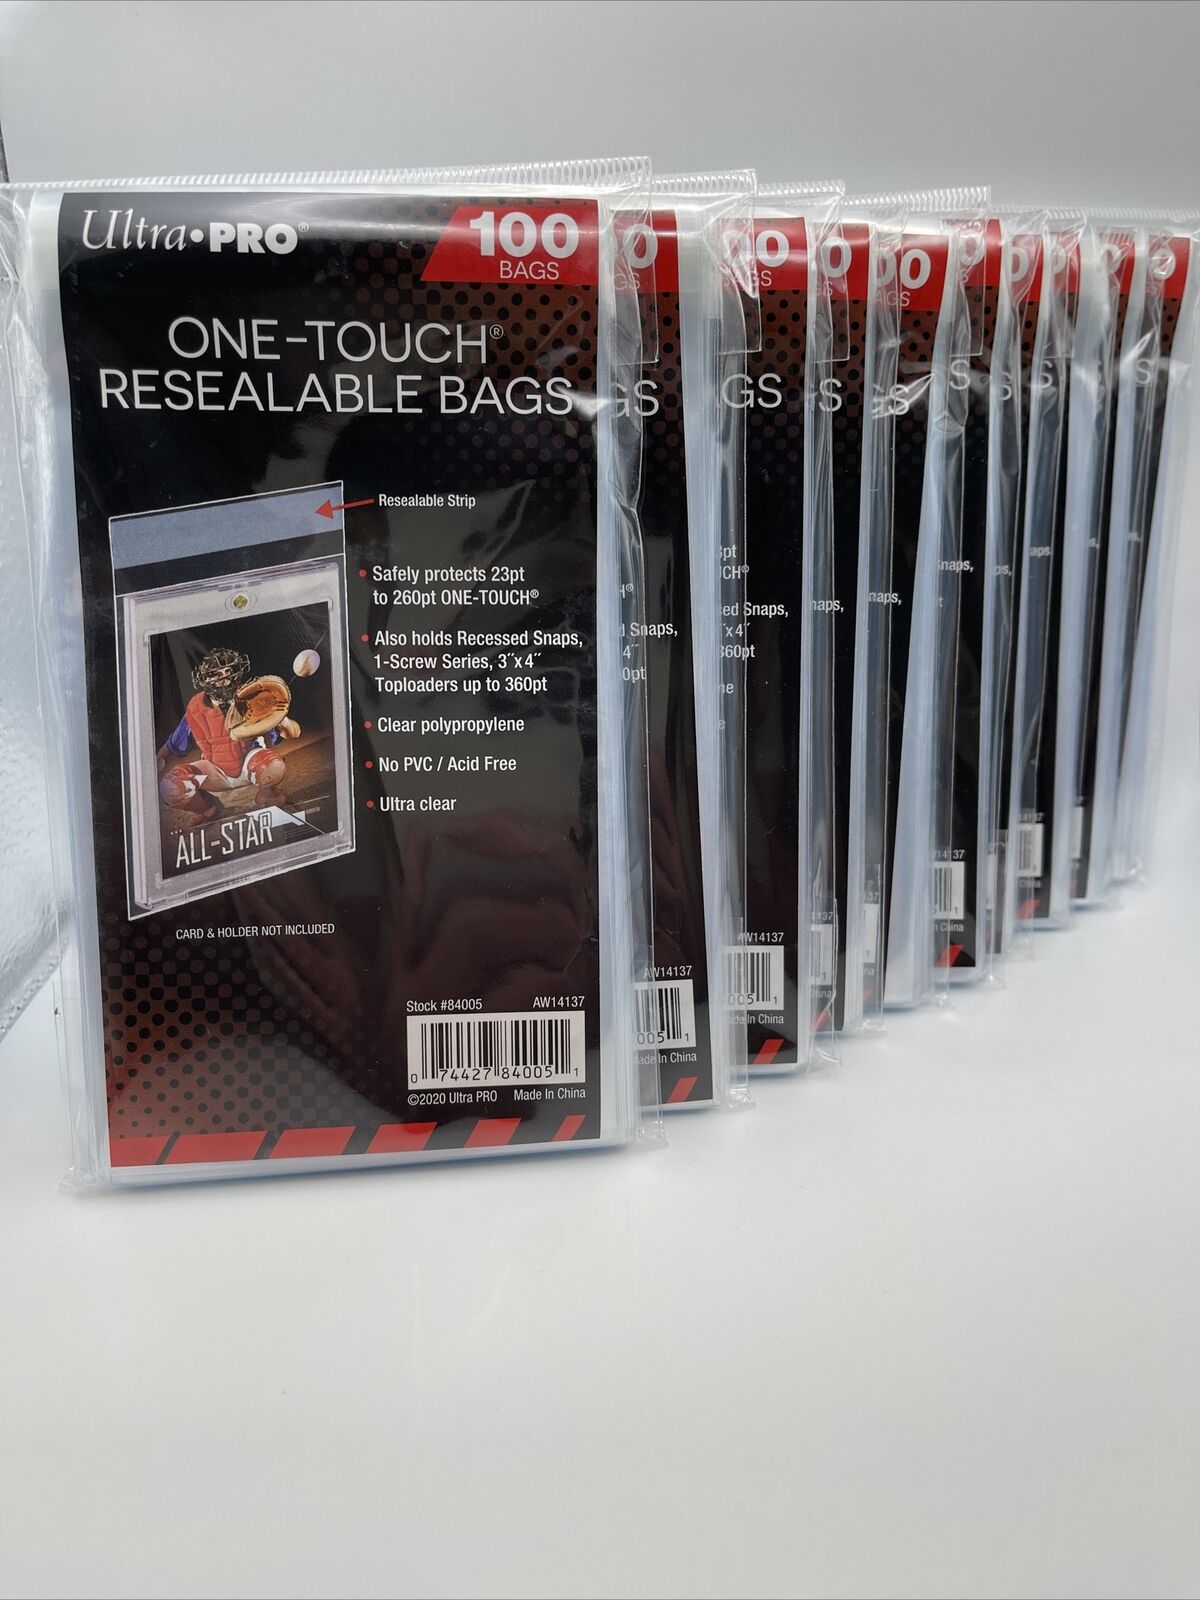 Ultra Pro One-Touch Resealable Bags 10 Packs of 100, 1000 Total Bags